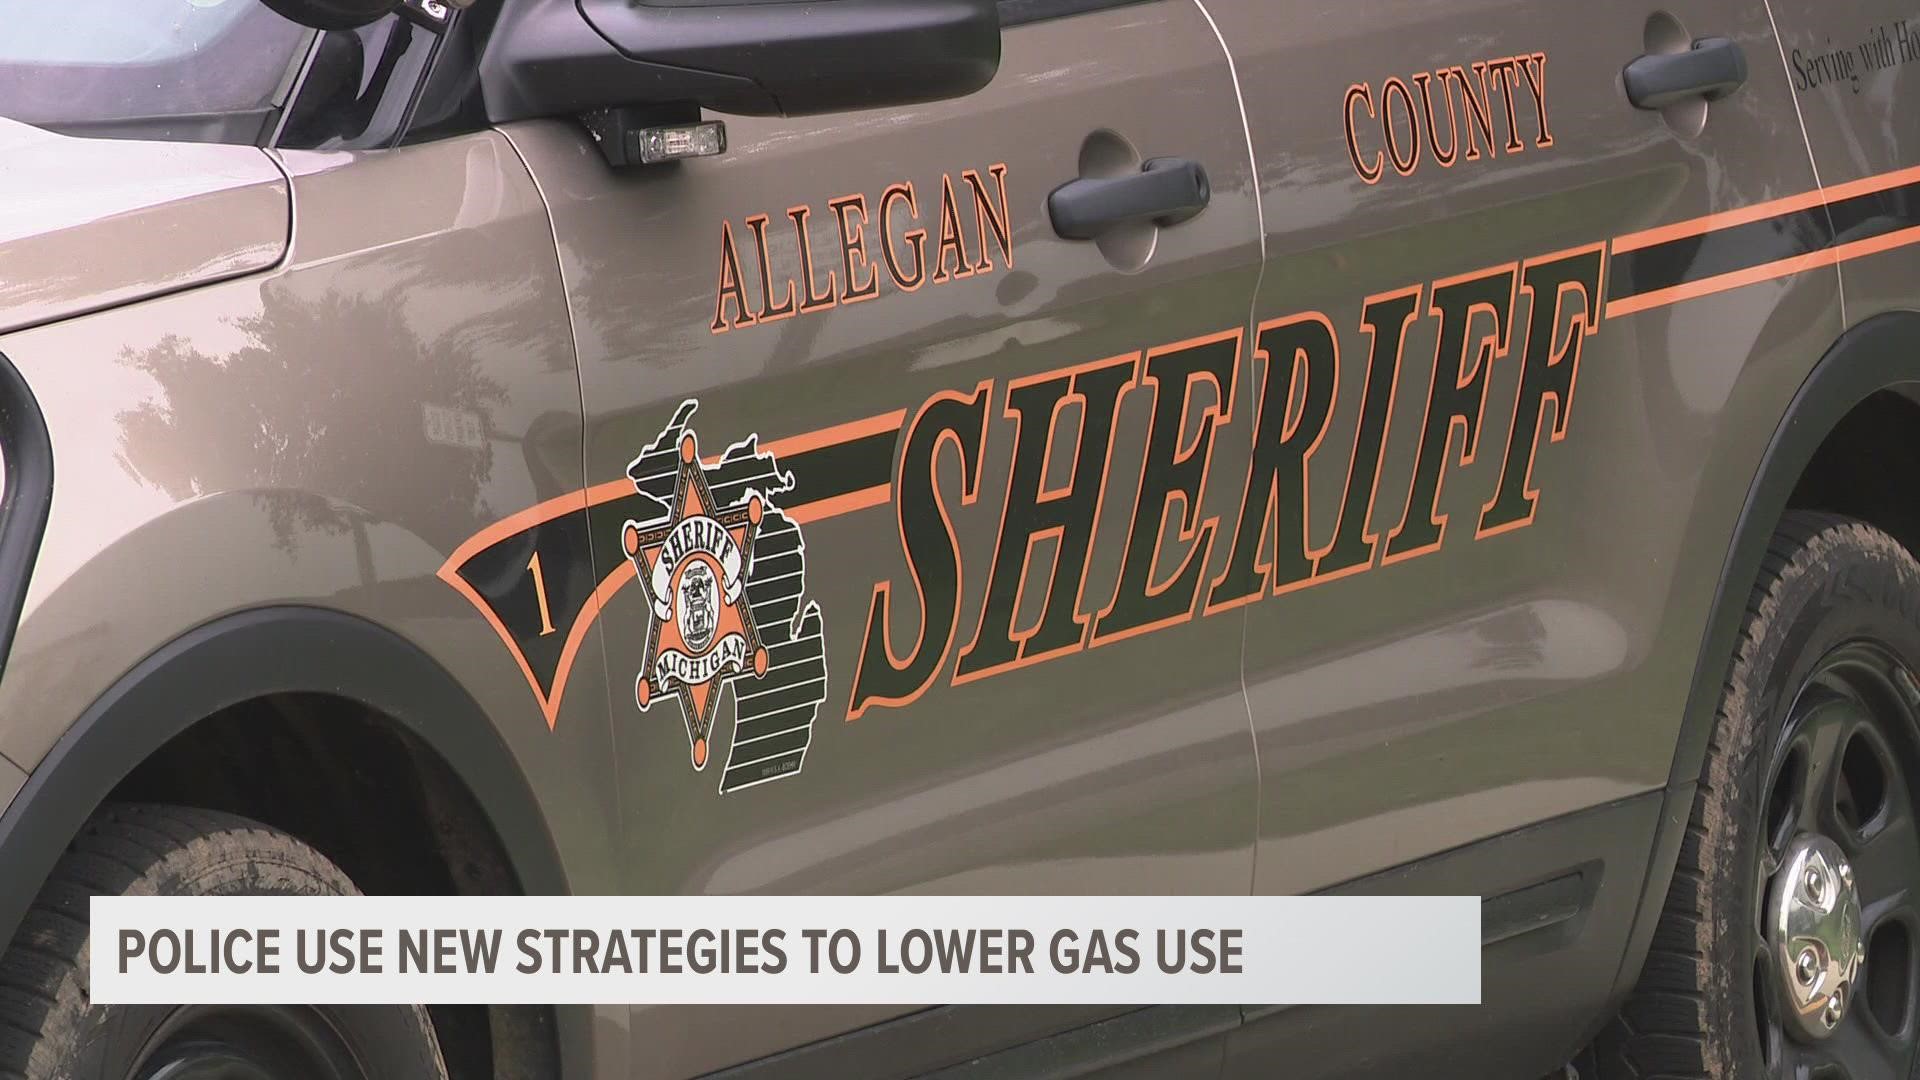 The average price for gas in West Michigan is around $5.19, and even law enforcement agencies are feeling pain at the pump.